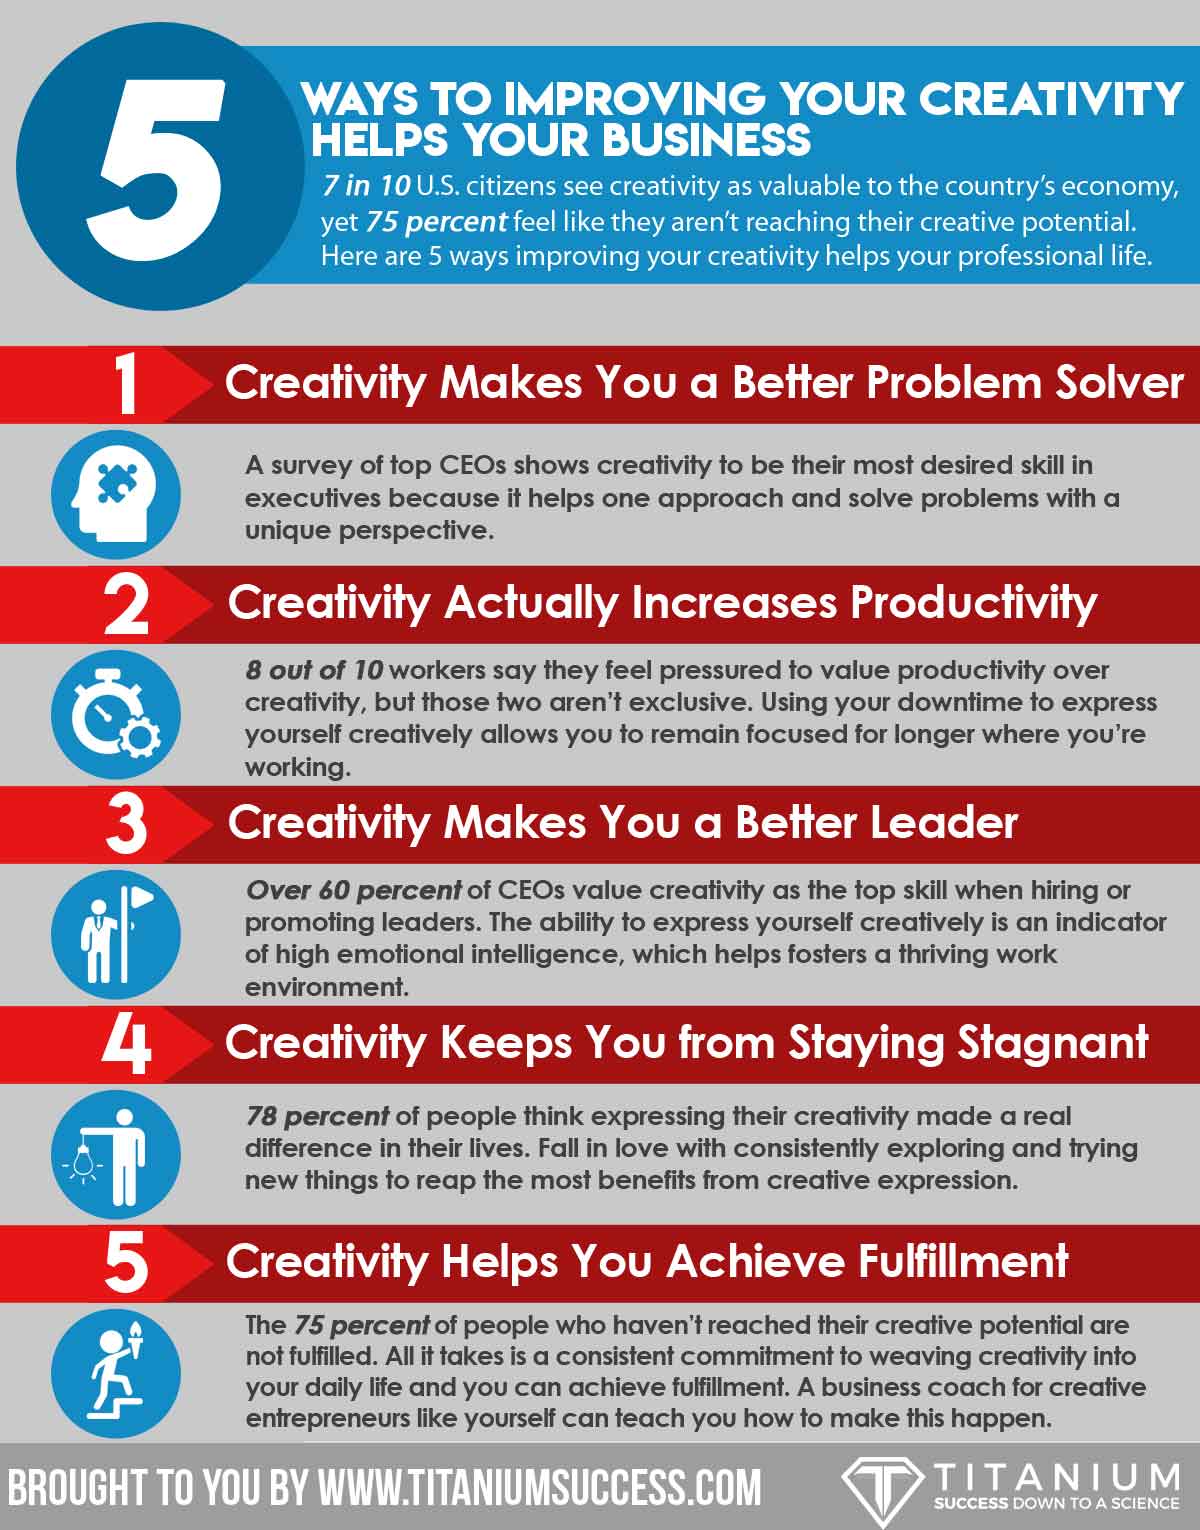 5 Ways to Improving Your Creativity Helps Your Business Infographic